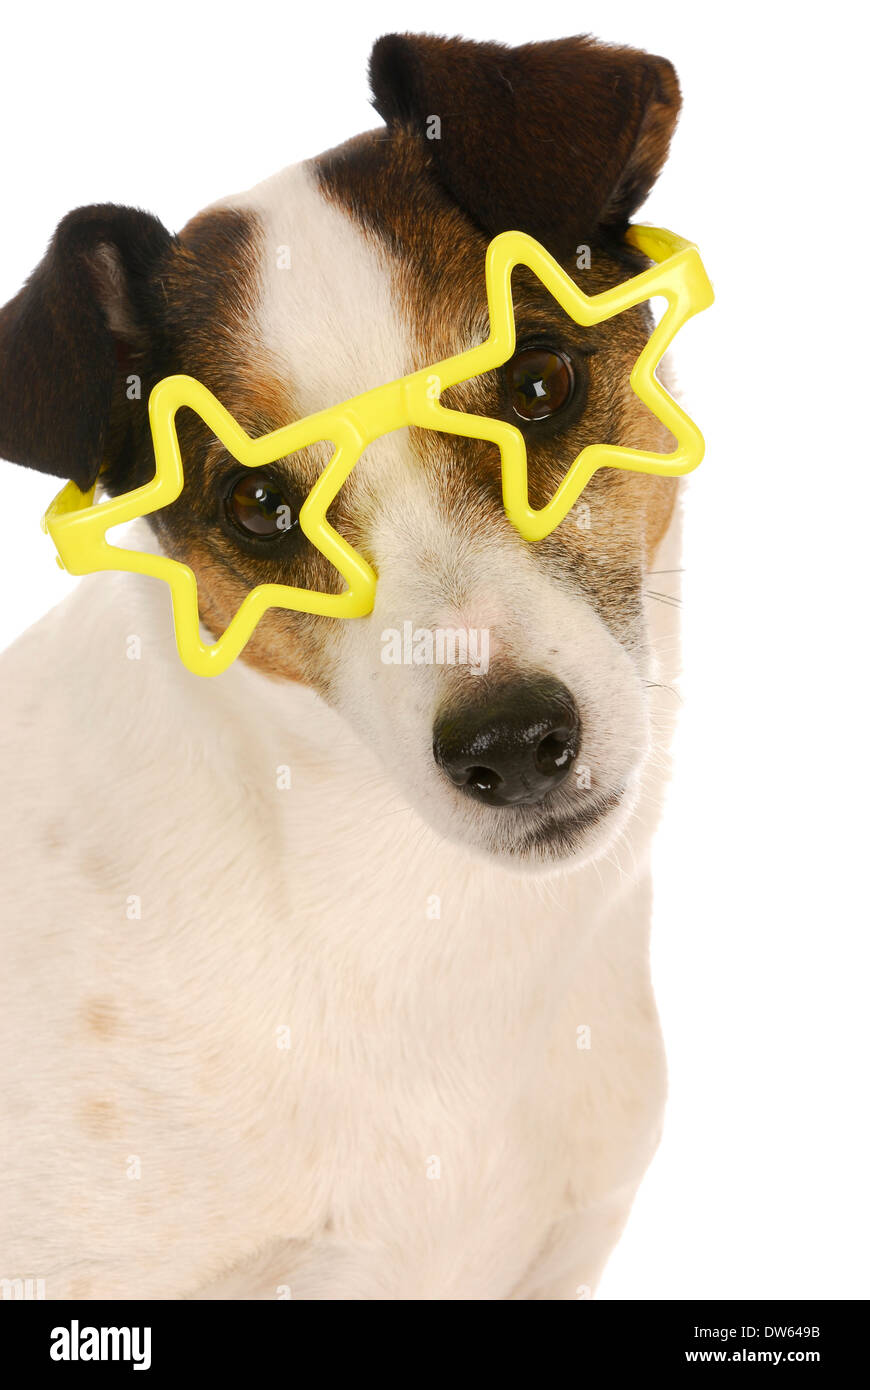 famous dog - jack russel terrier wearing yellow star shaped glasses on white background Stock Photo